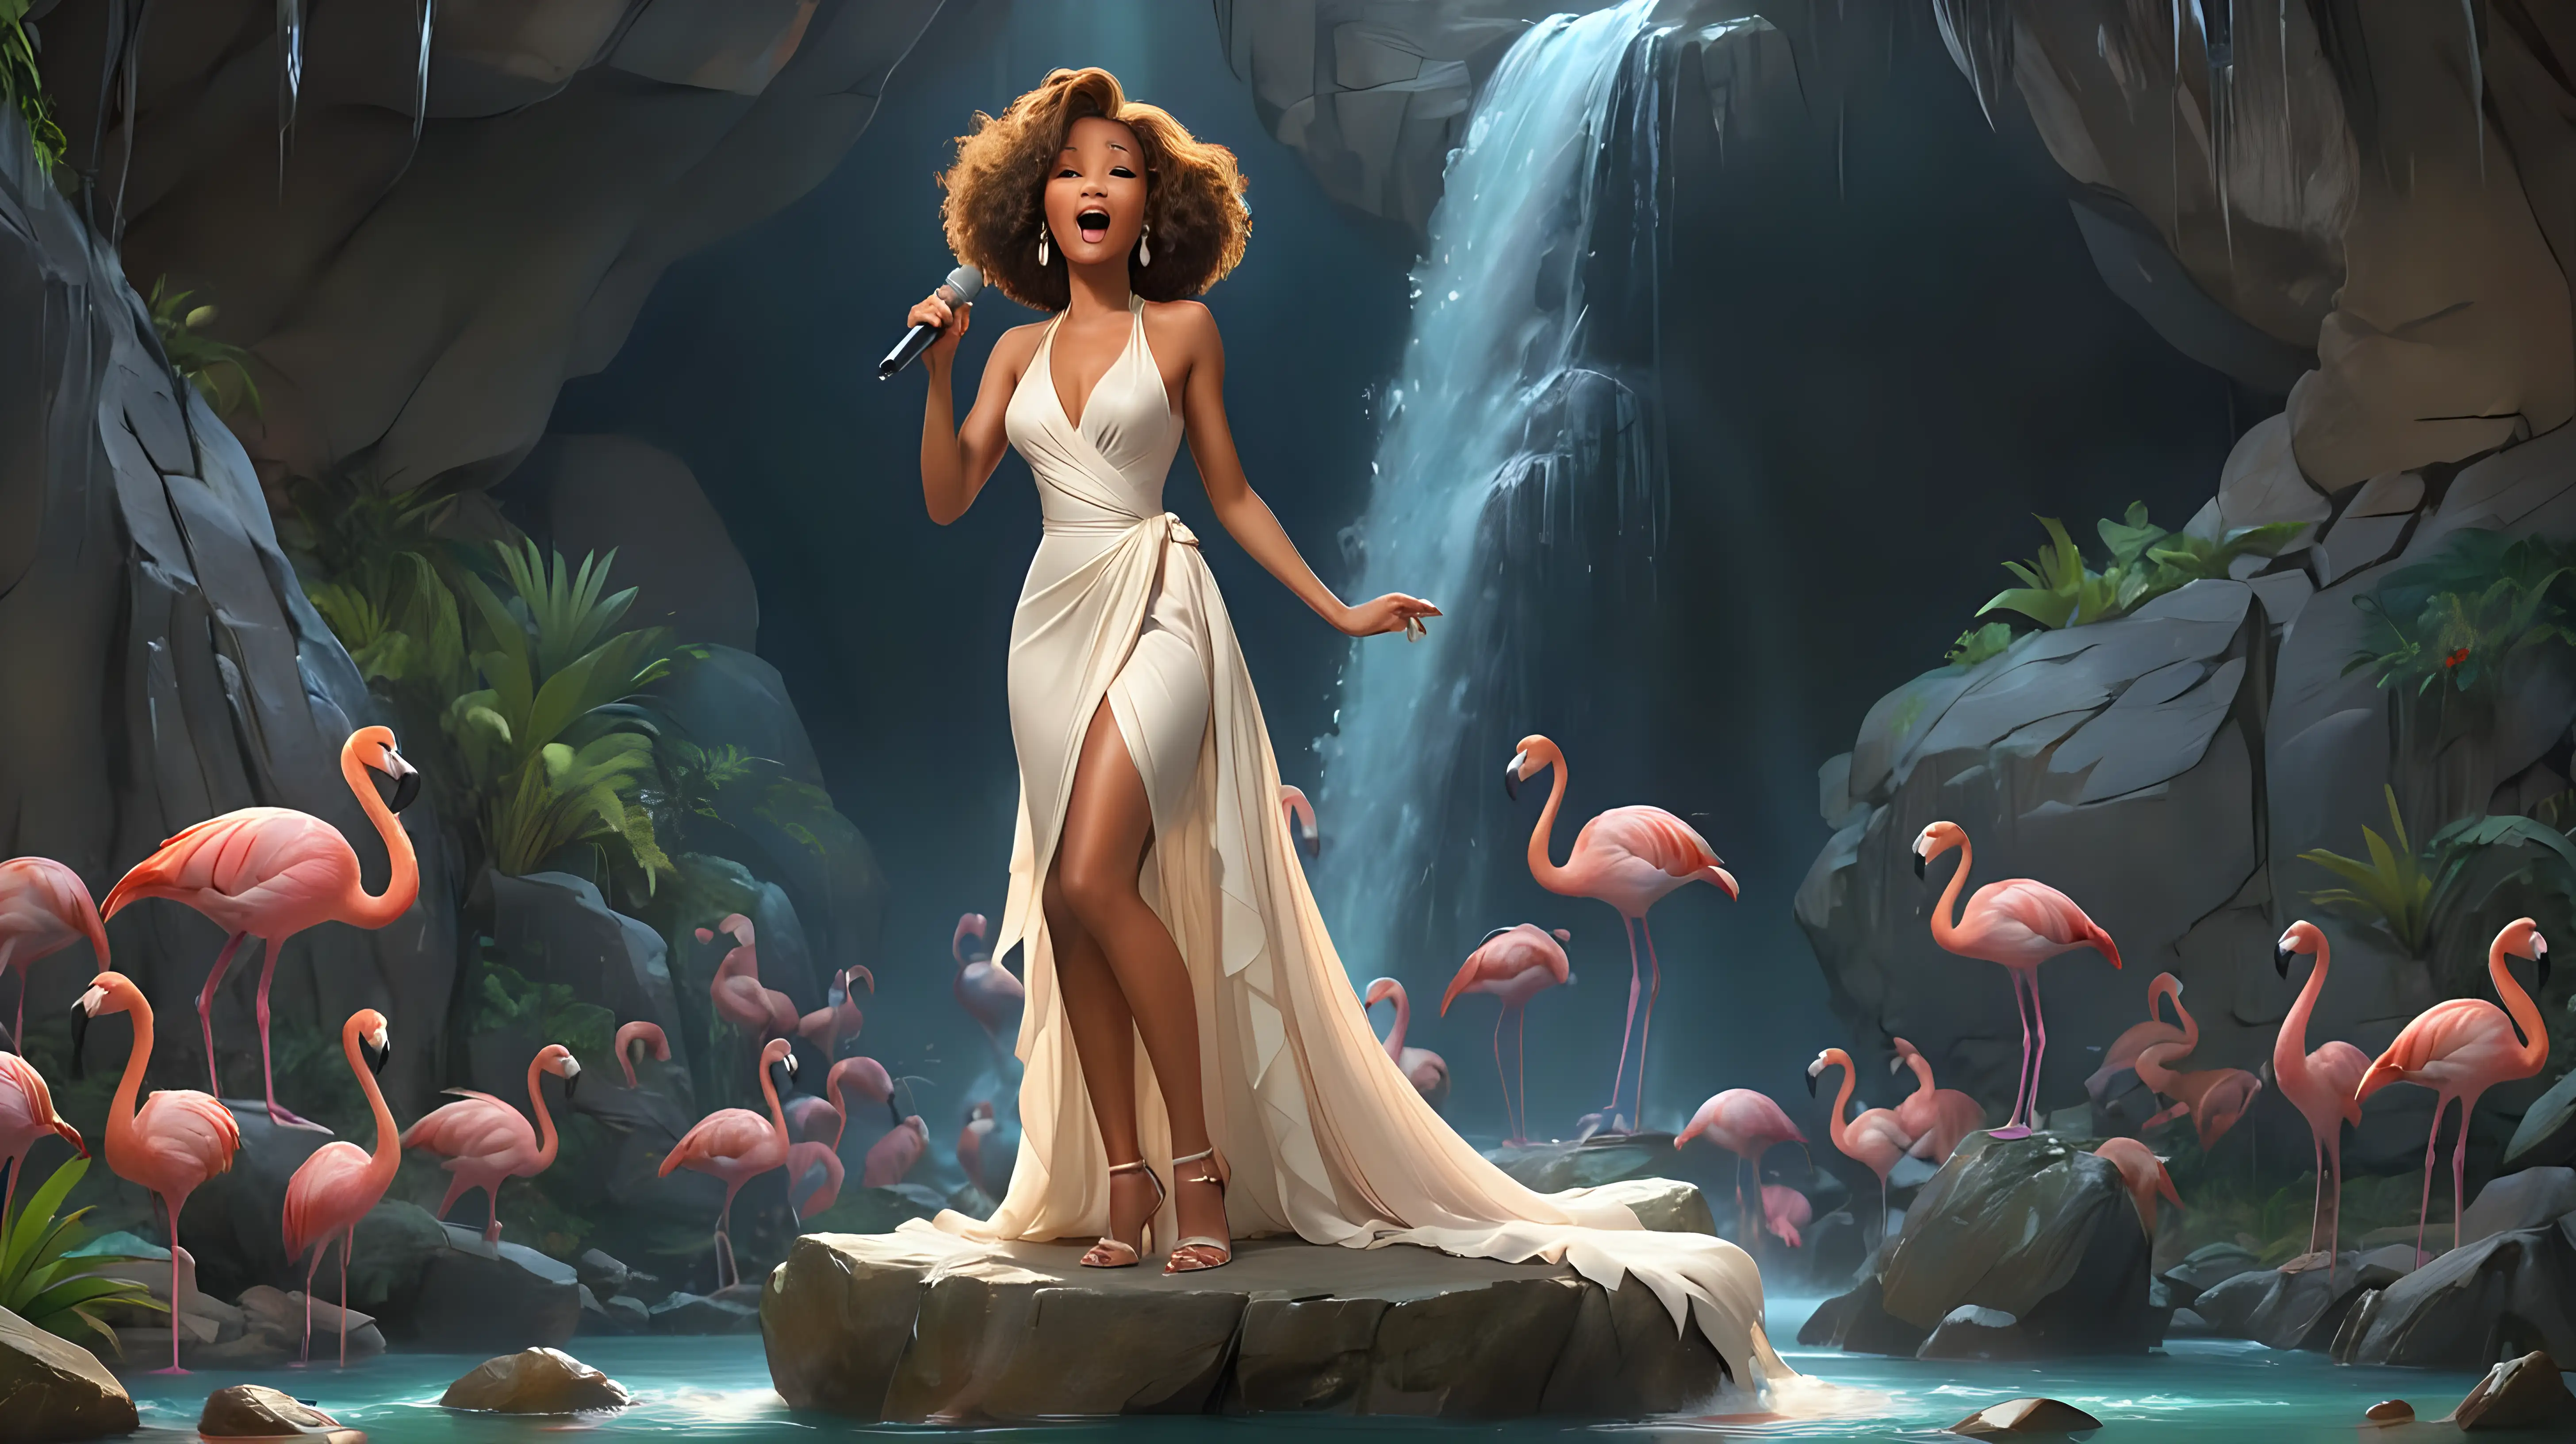 Whitney Houston Singing on Rock with Flamingos and Waterfall Background